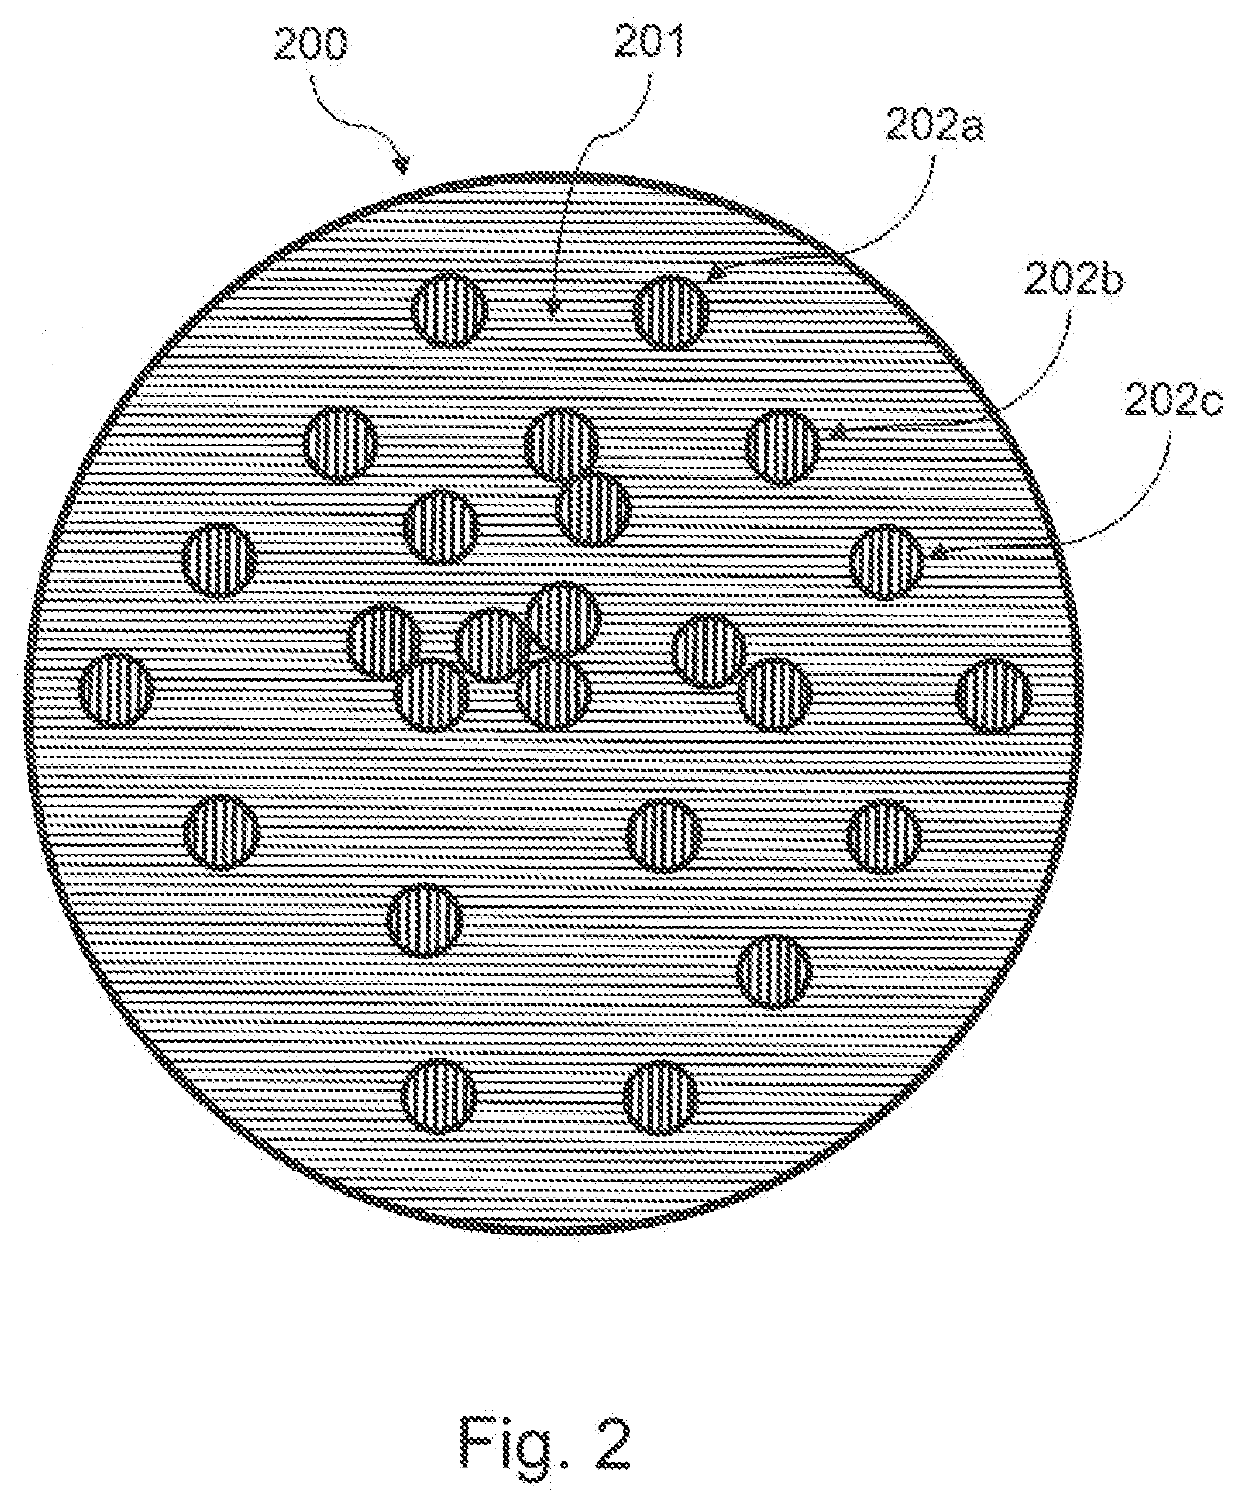 Conductive long fiber thermoplastic compounds for electromagnetic shielding